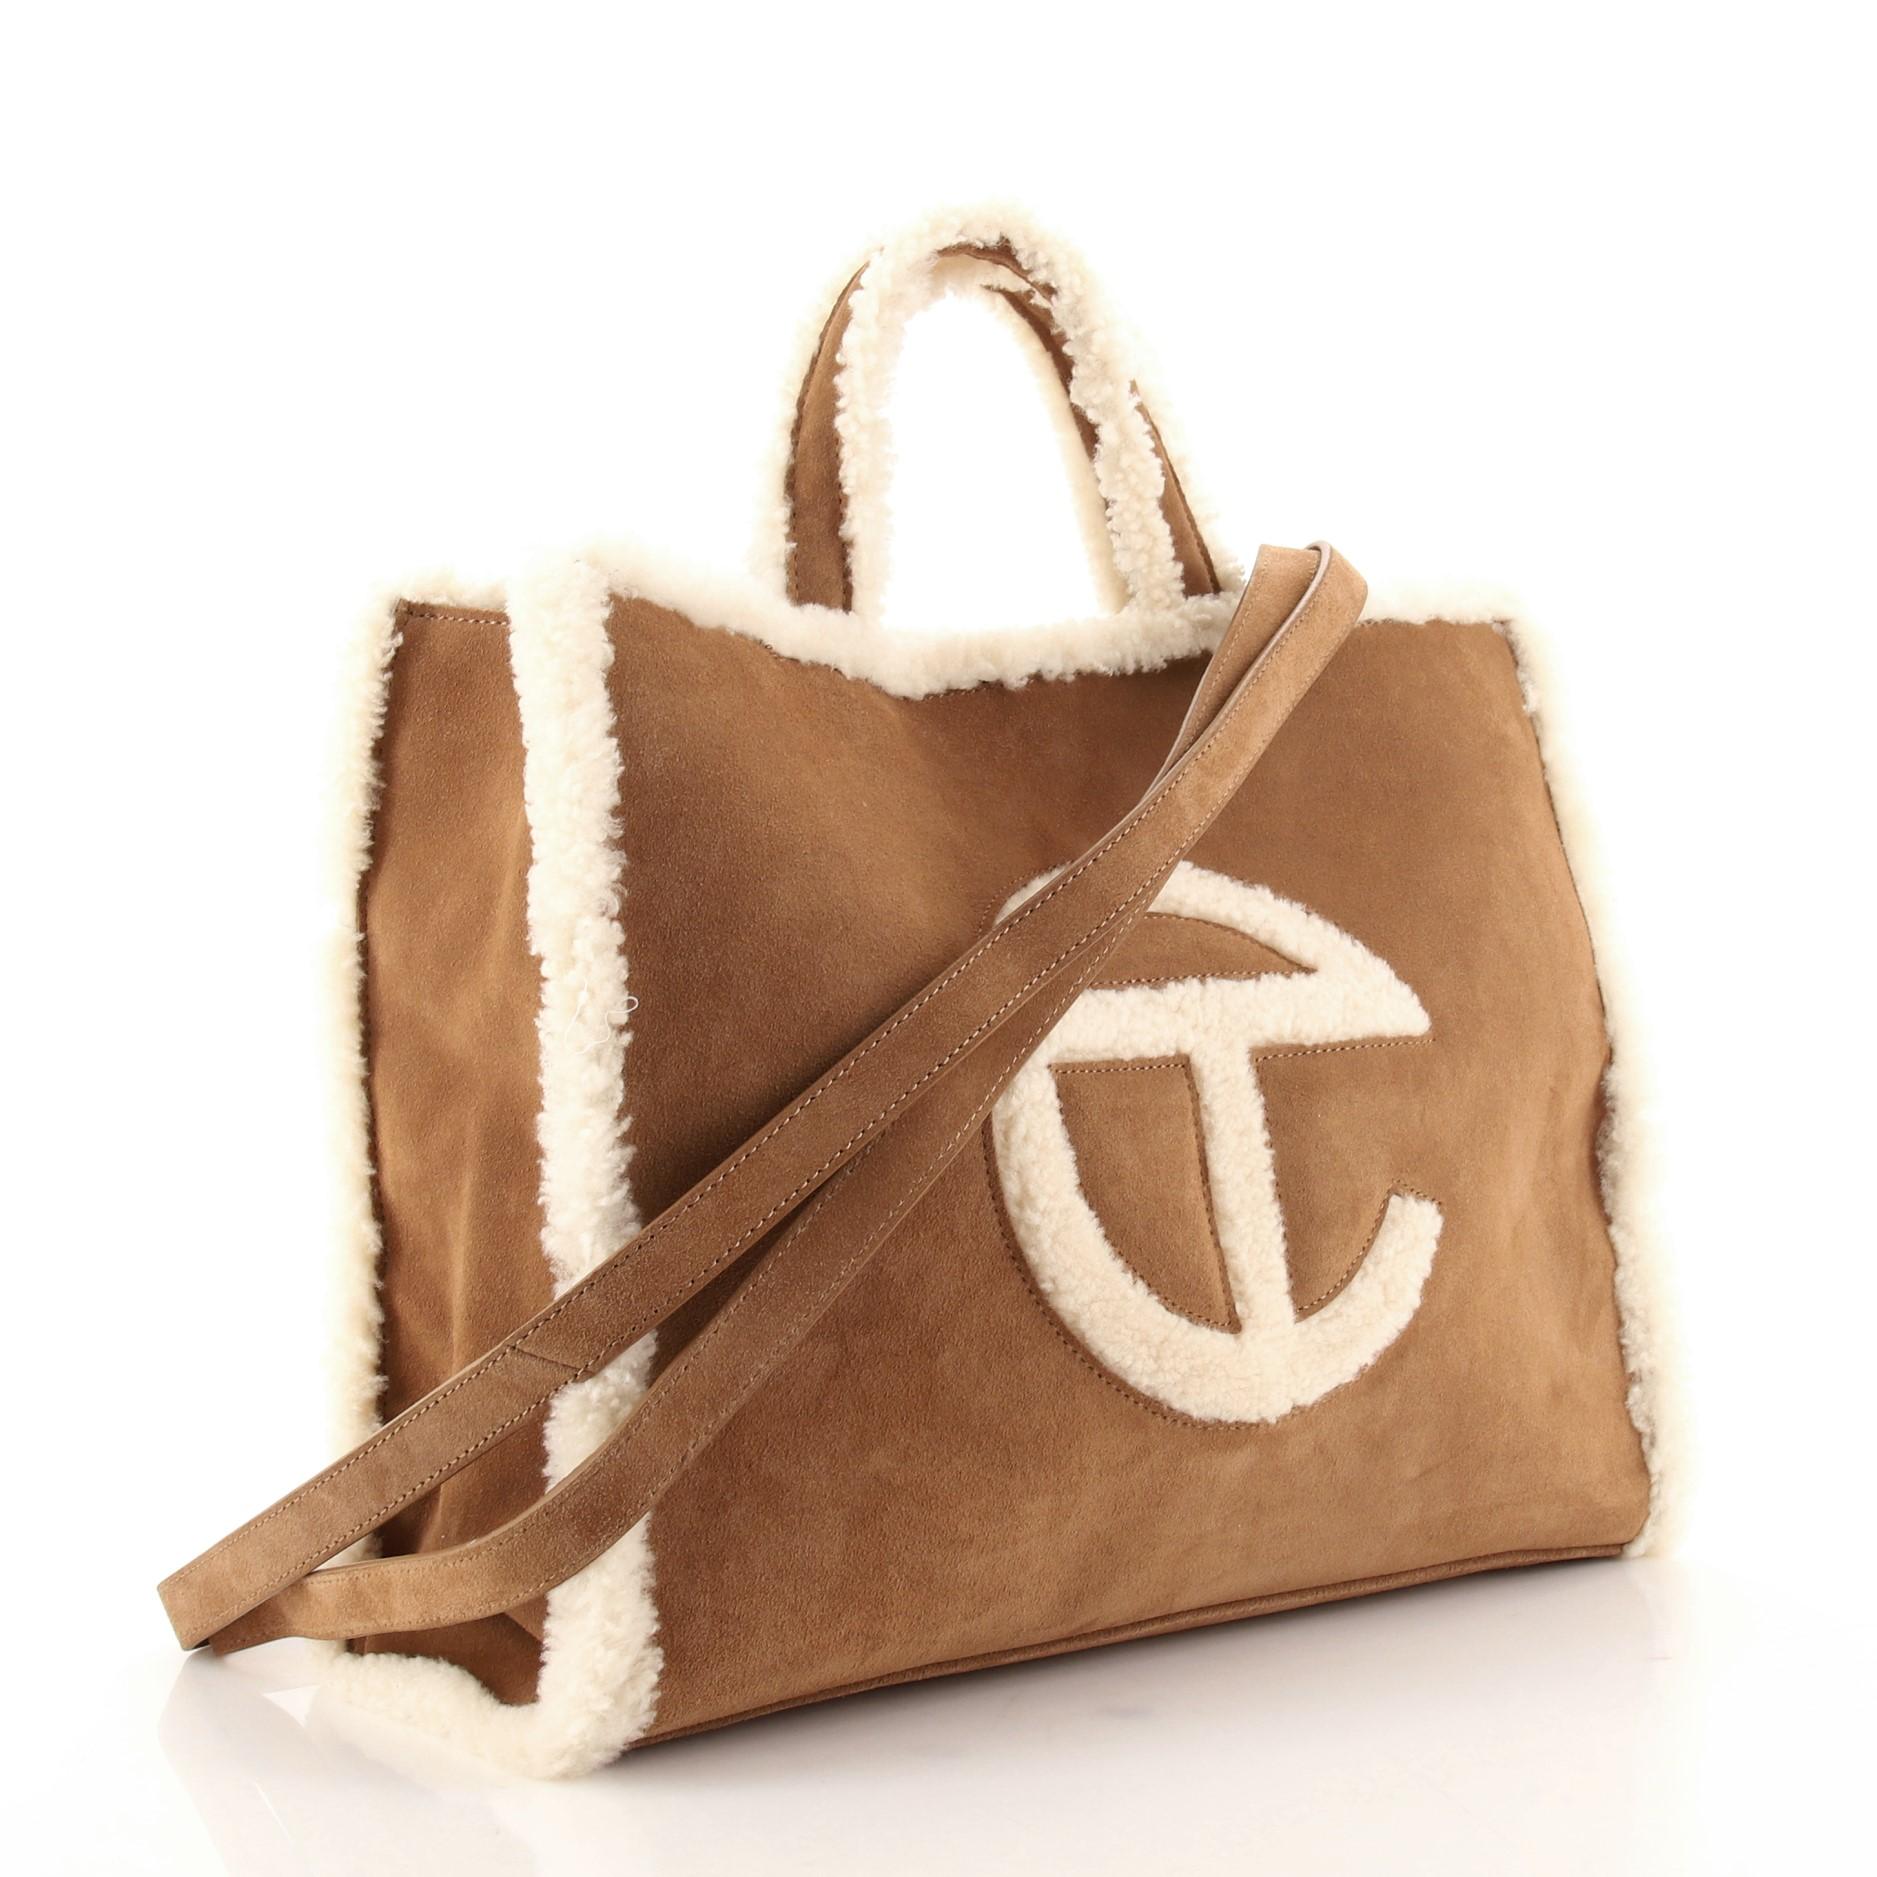 Brown Telfar UGG Shopping Tote Suede with Shearling Medium